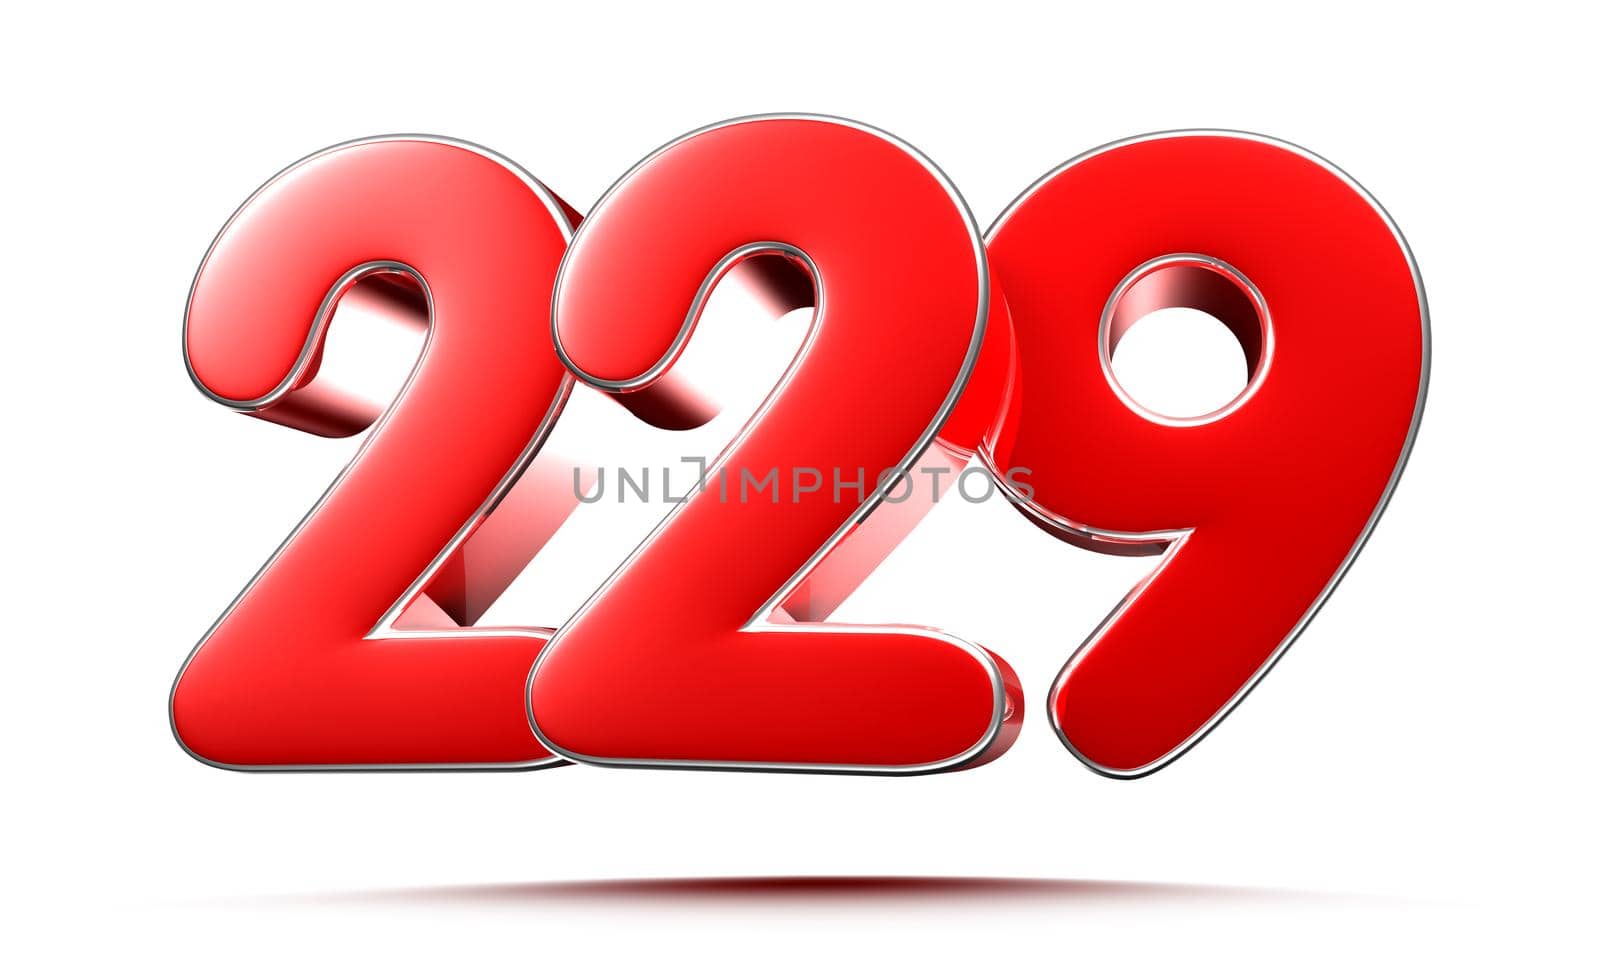 Rounded red numbers 229 on white background 3D illustration with clipping path